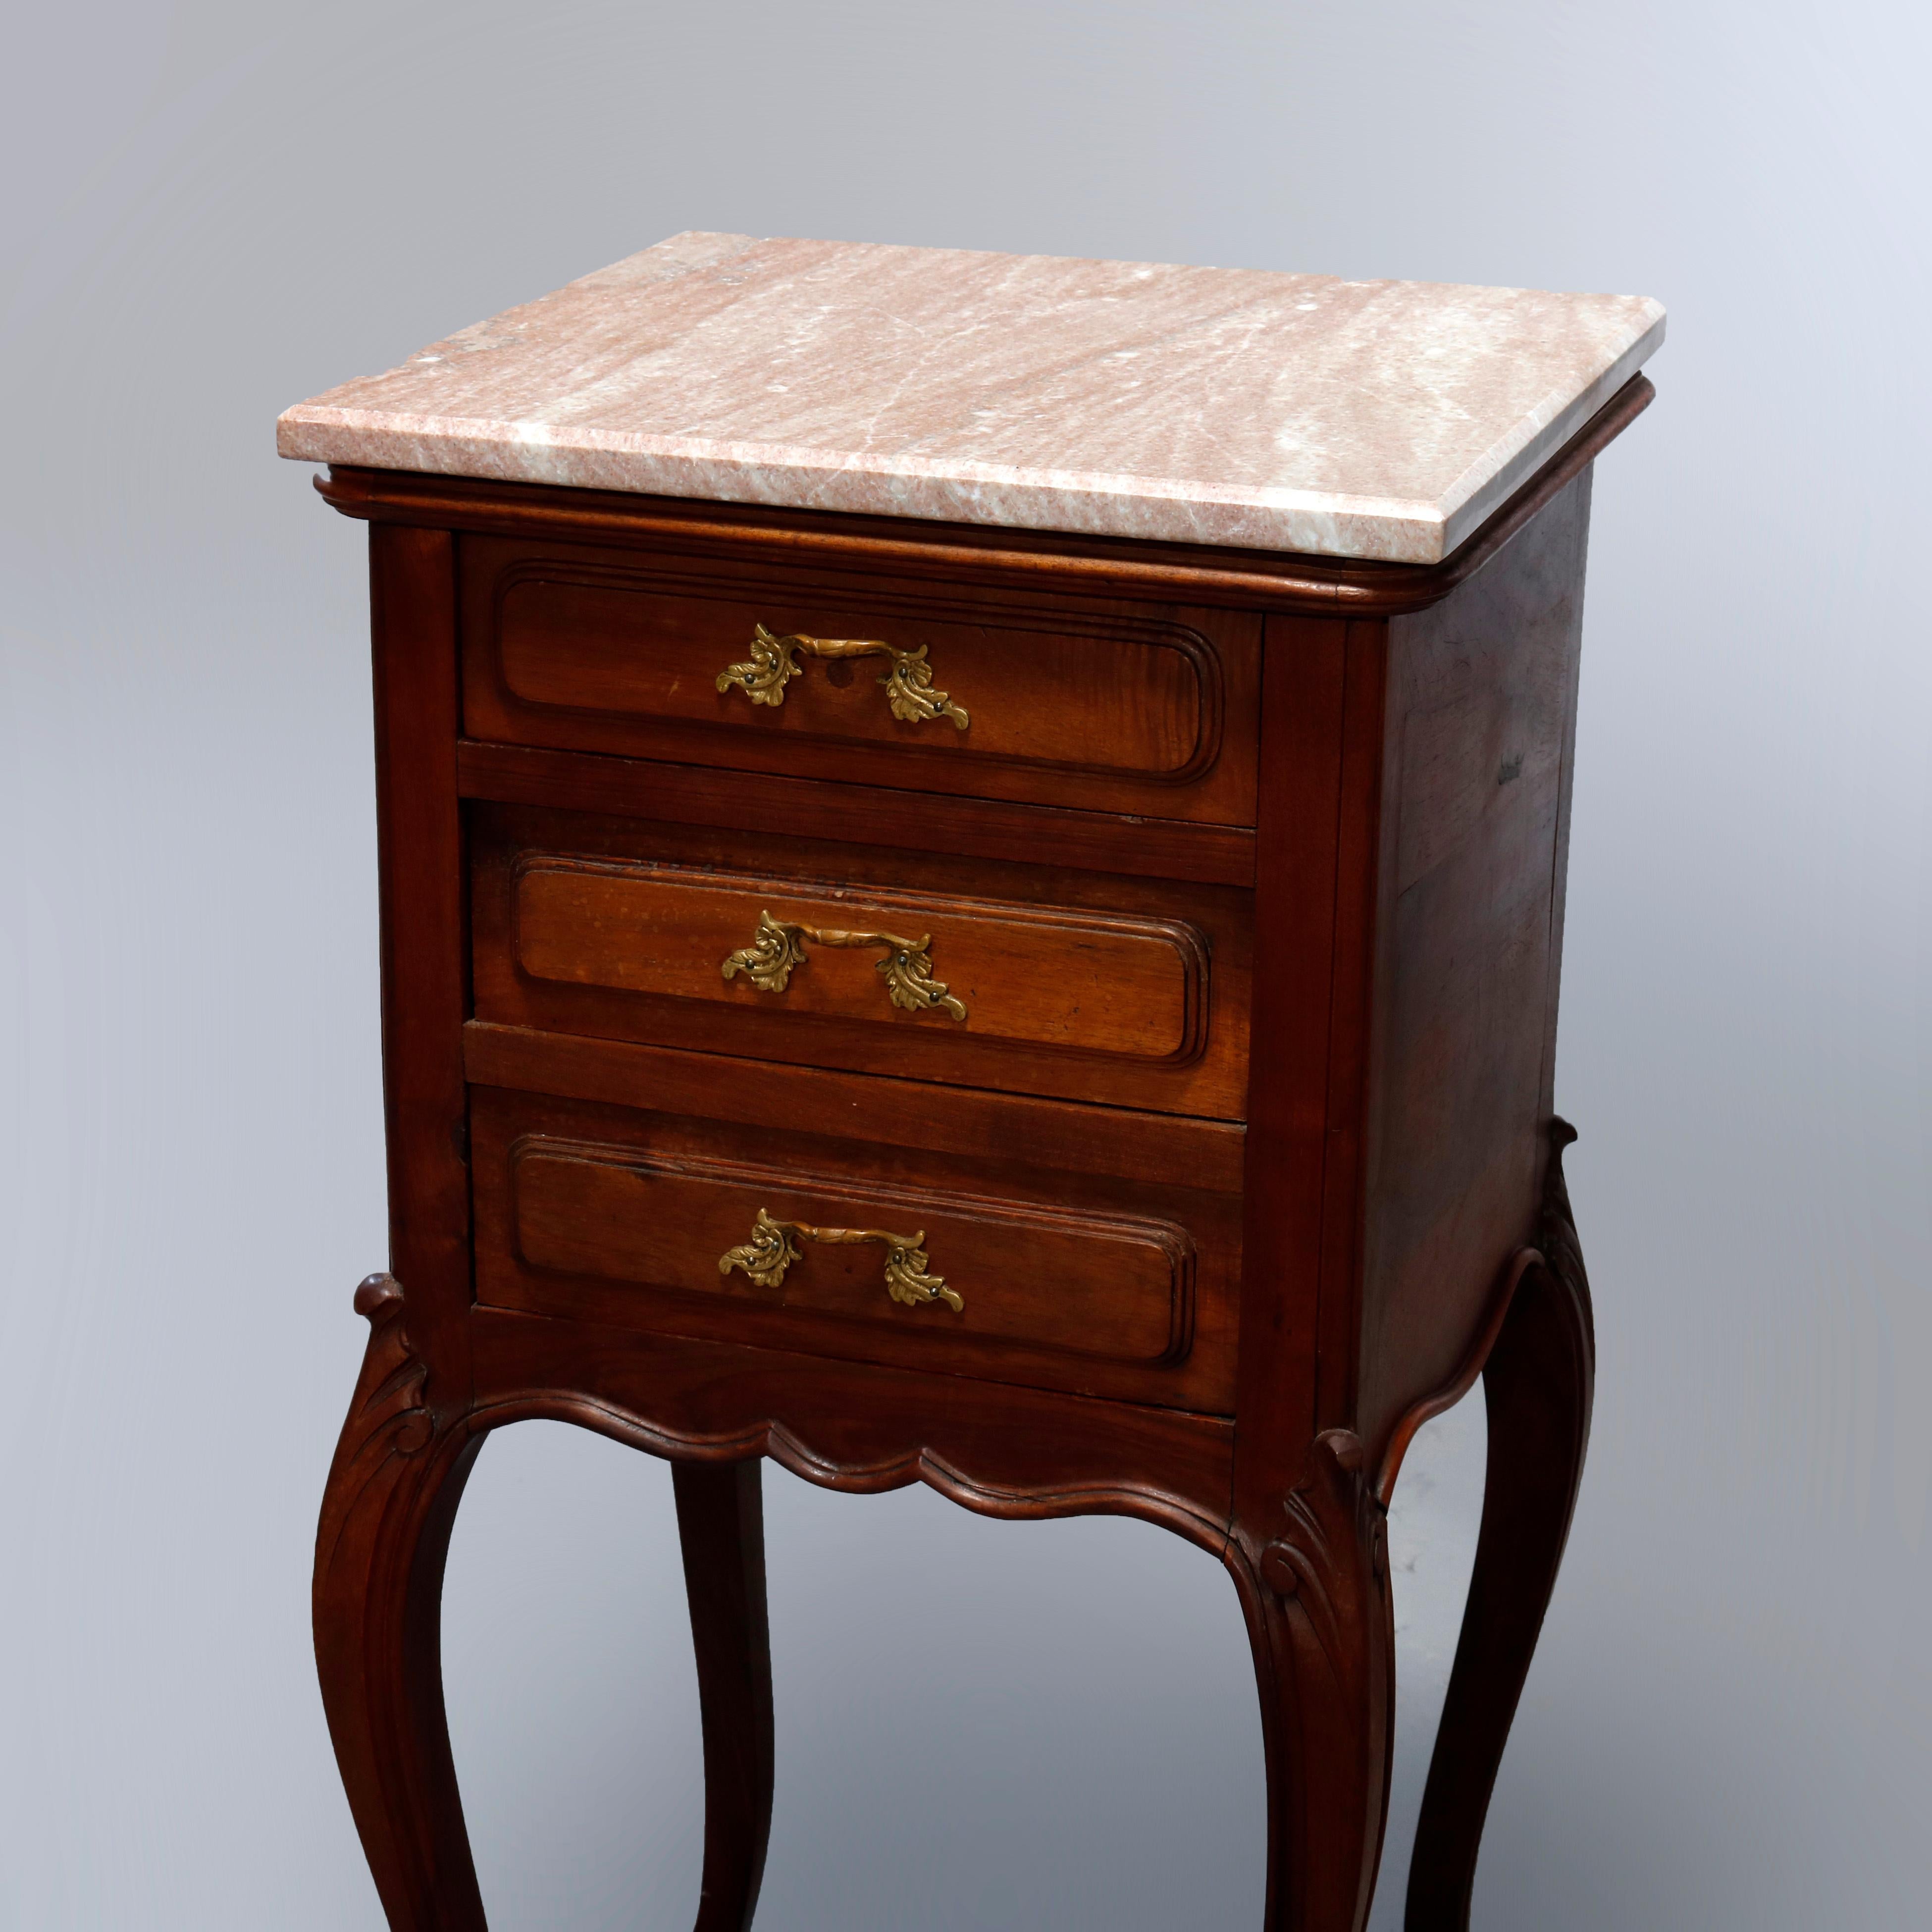 A vintage French Louis XVI style side stand offers marble top over triple drawer walnut case, raised on cabriole legs, cast foliate pulls throughout, 20th century.

Measures: 33.25